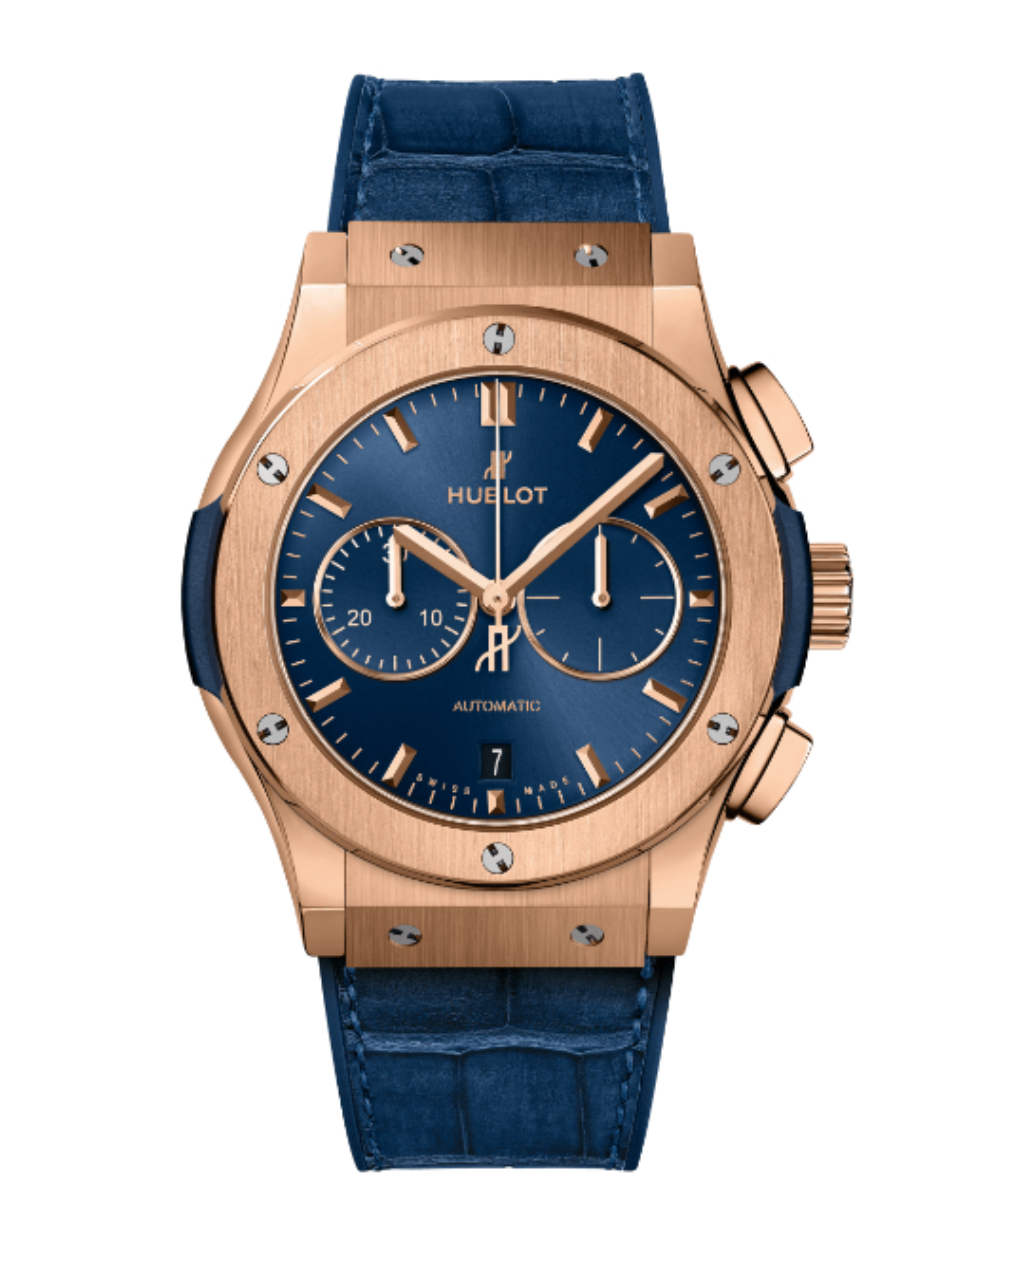 Classic Fusion Chronograph King Gold Blue 42mm 541.OX.7180.LR